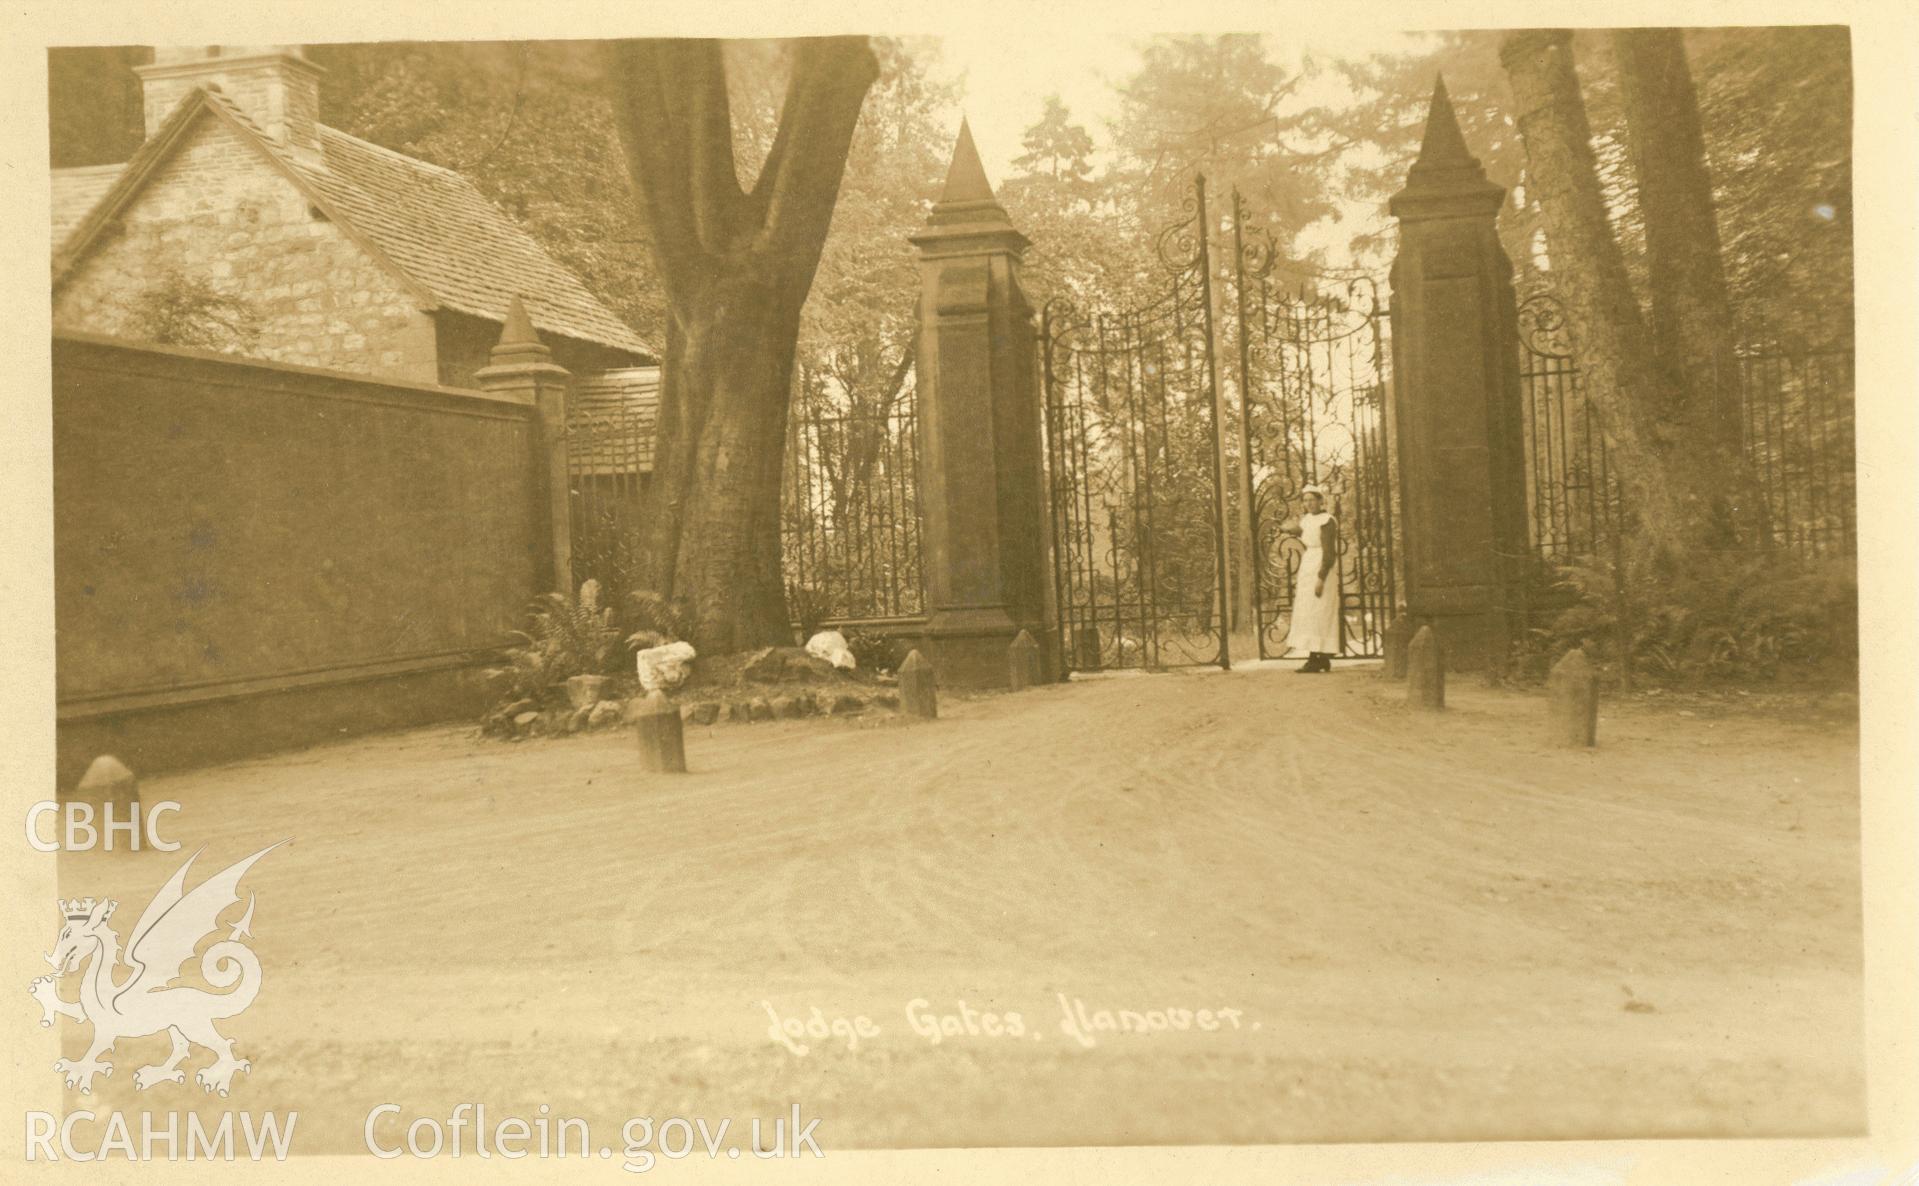 Digitised postcard image of Lodge gates, Llanover, with figure. Produced by Parks and Gardens Data Services, from an original item in the Peter Davis Collection at Parks and Gardens UK. We hold only web-resolution images of this collection, suitable for viewing on screen and for research purposes only. We do not hold the original images, or publication quality scans.